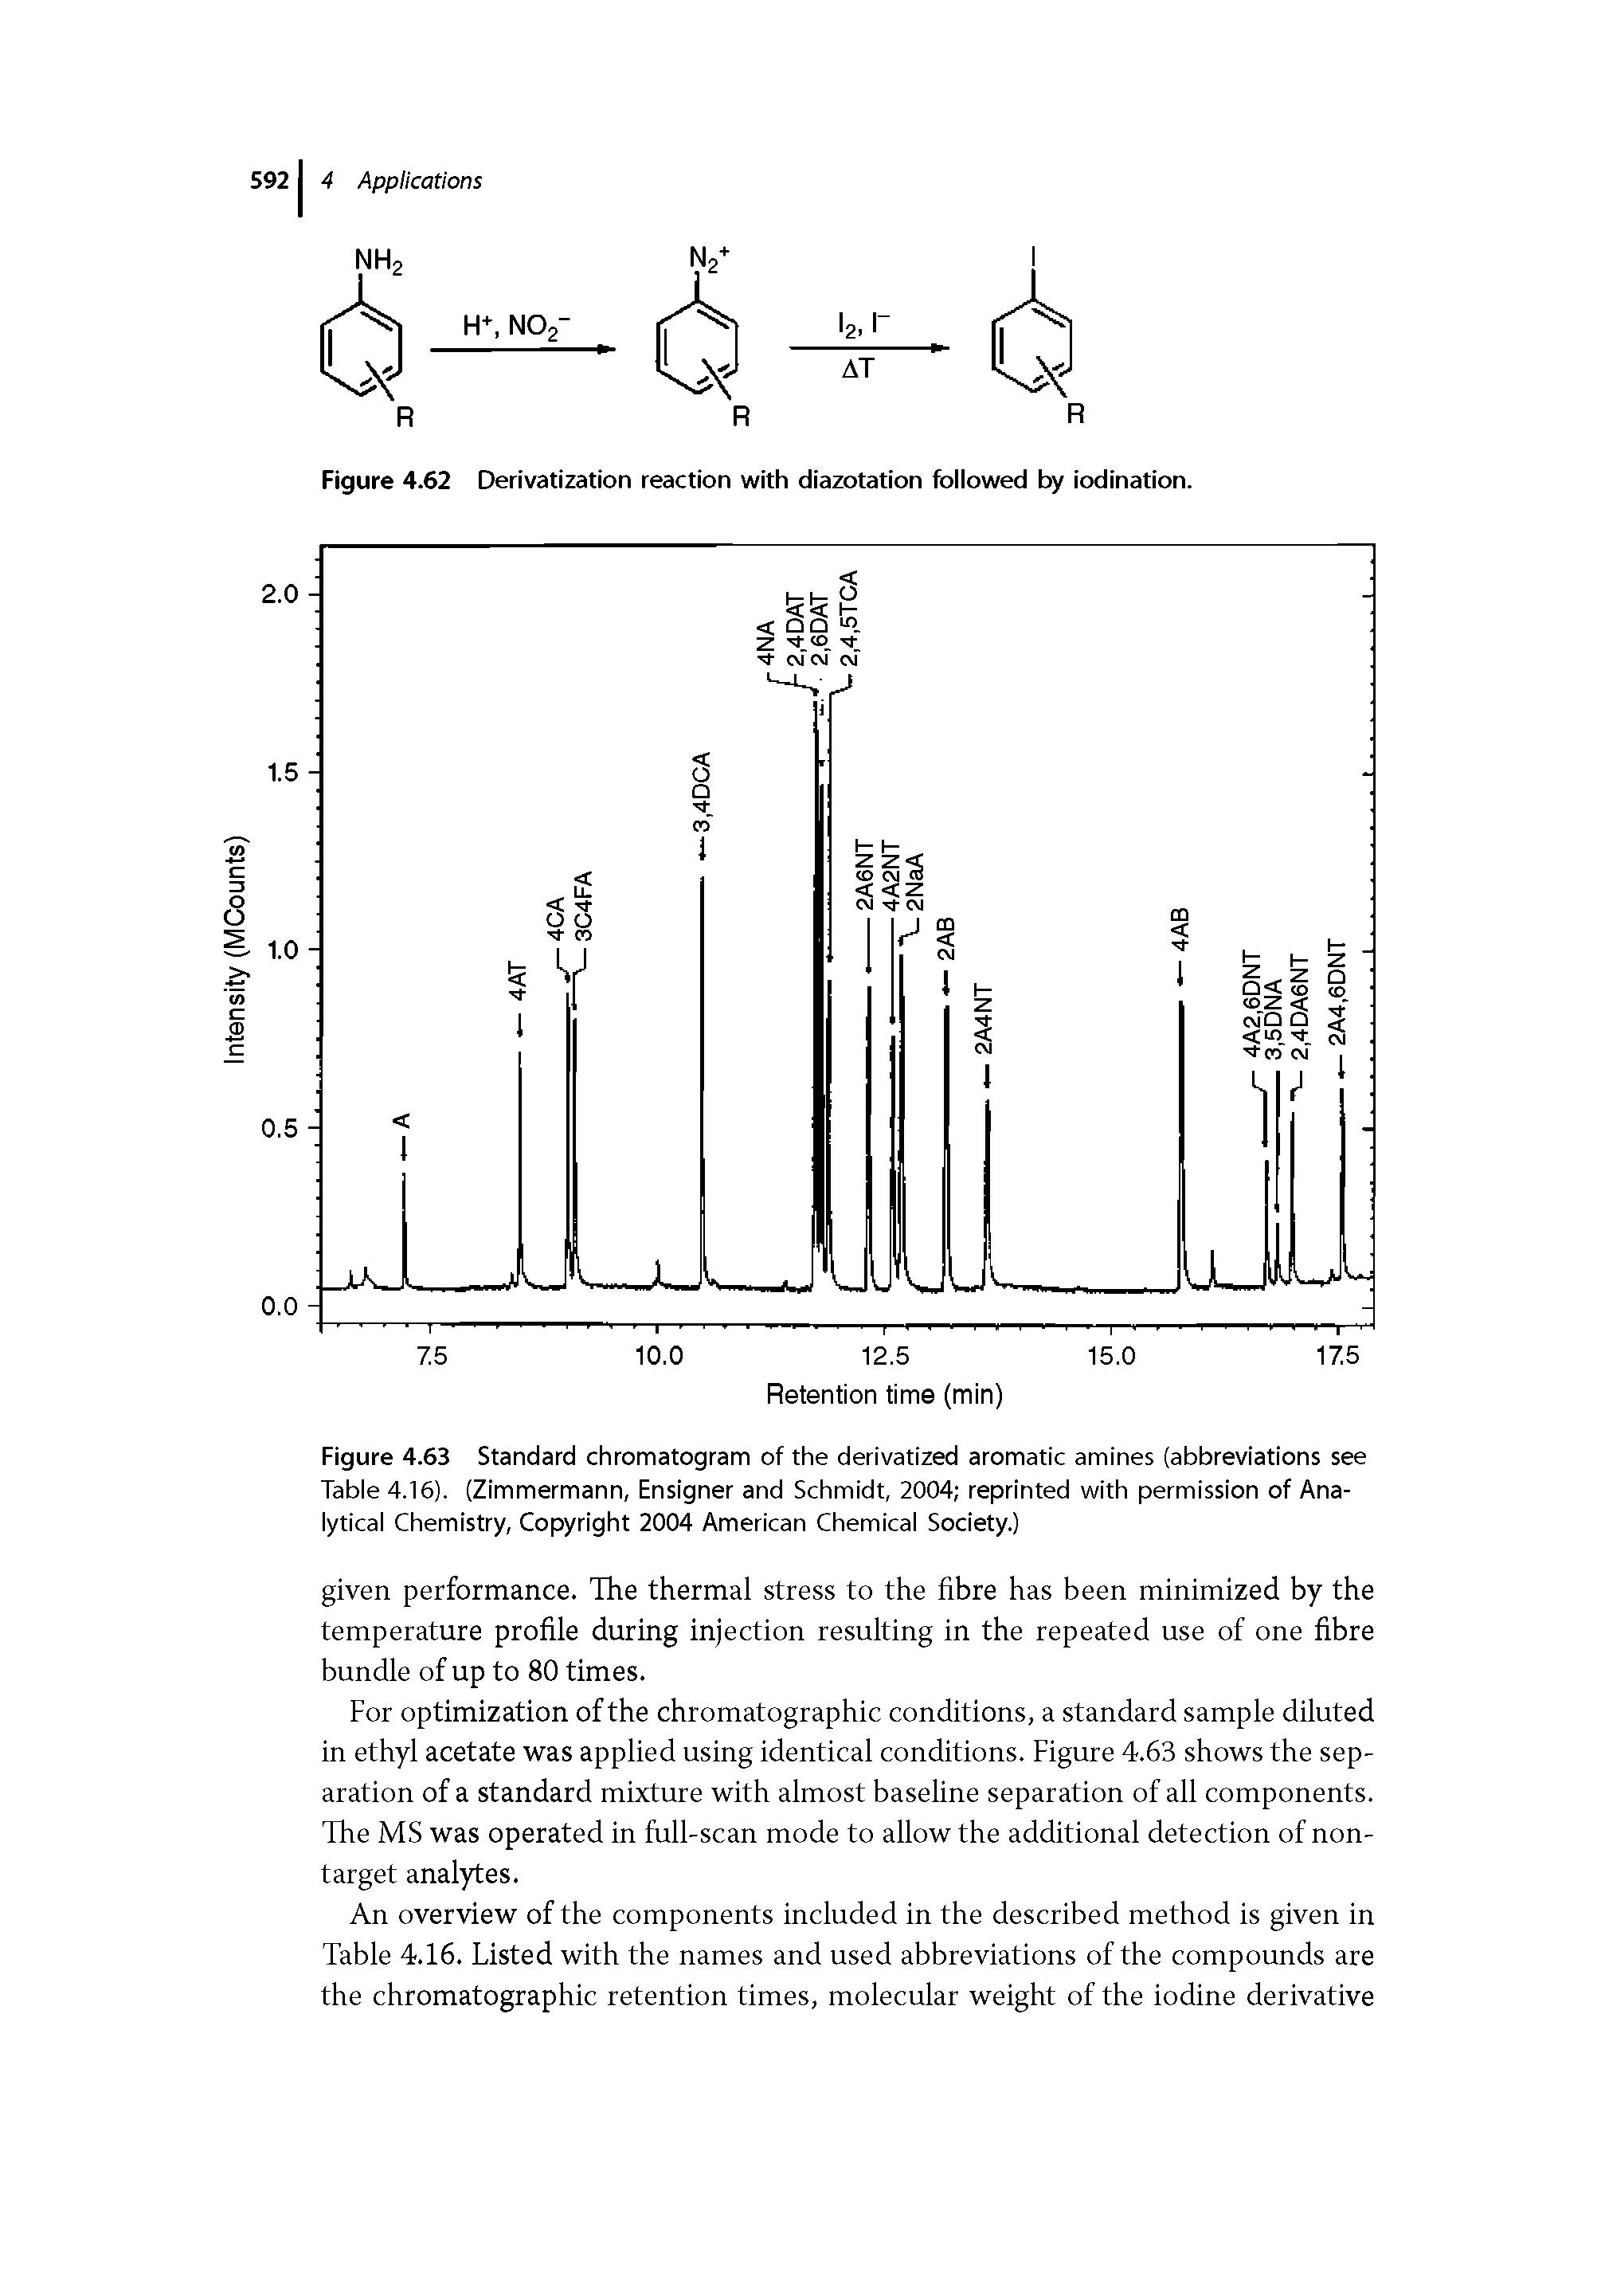 Figure 4.63 Standard chromatogram of the derivatized aromatic amines (abbreviations see Table 4.16). (Zimmermann, Ensigner and Schmidt, 2004 reprinted with permission of Analytical Chemistry, Copyright 2004 American Chemical Society.)...